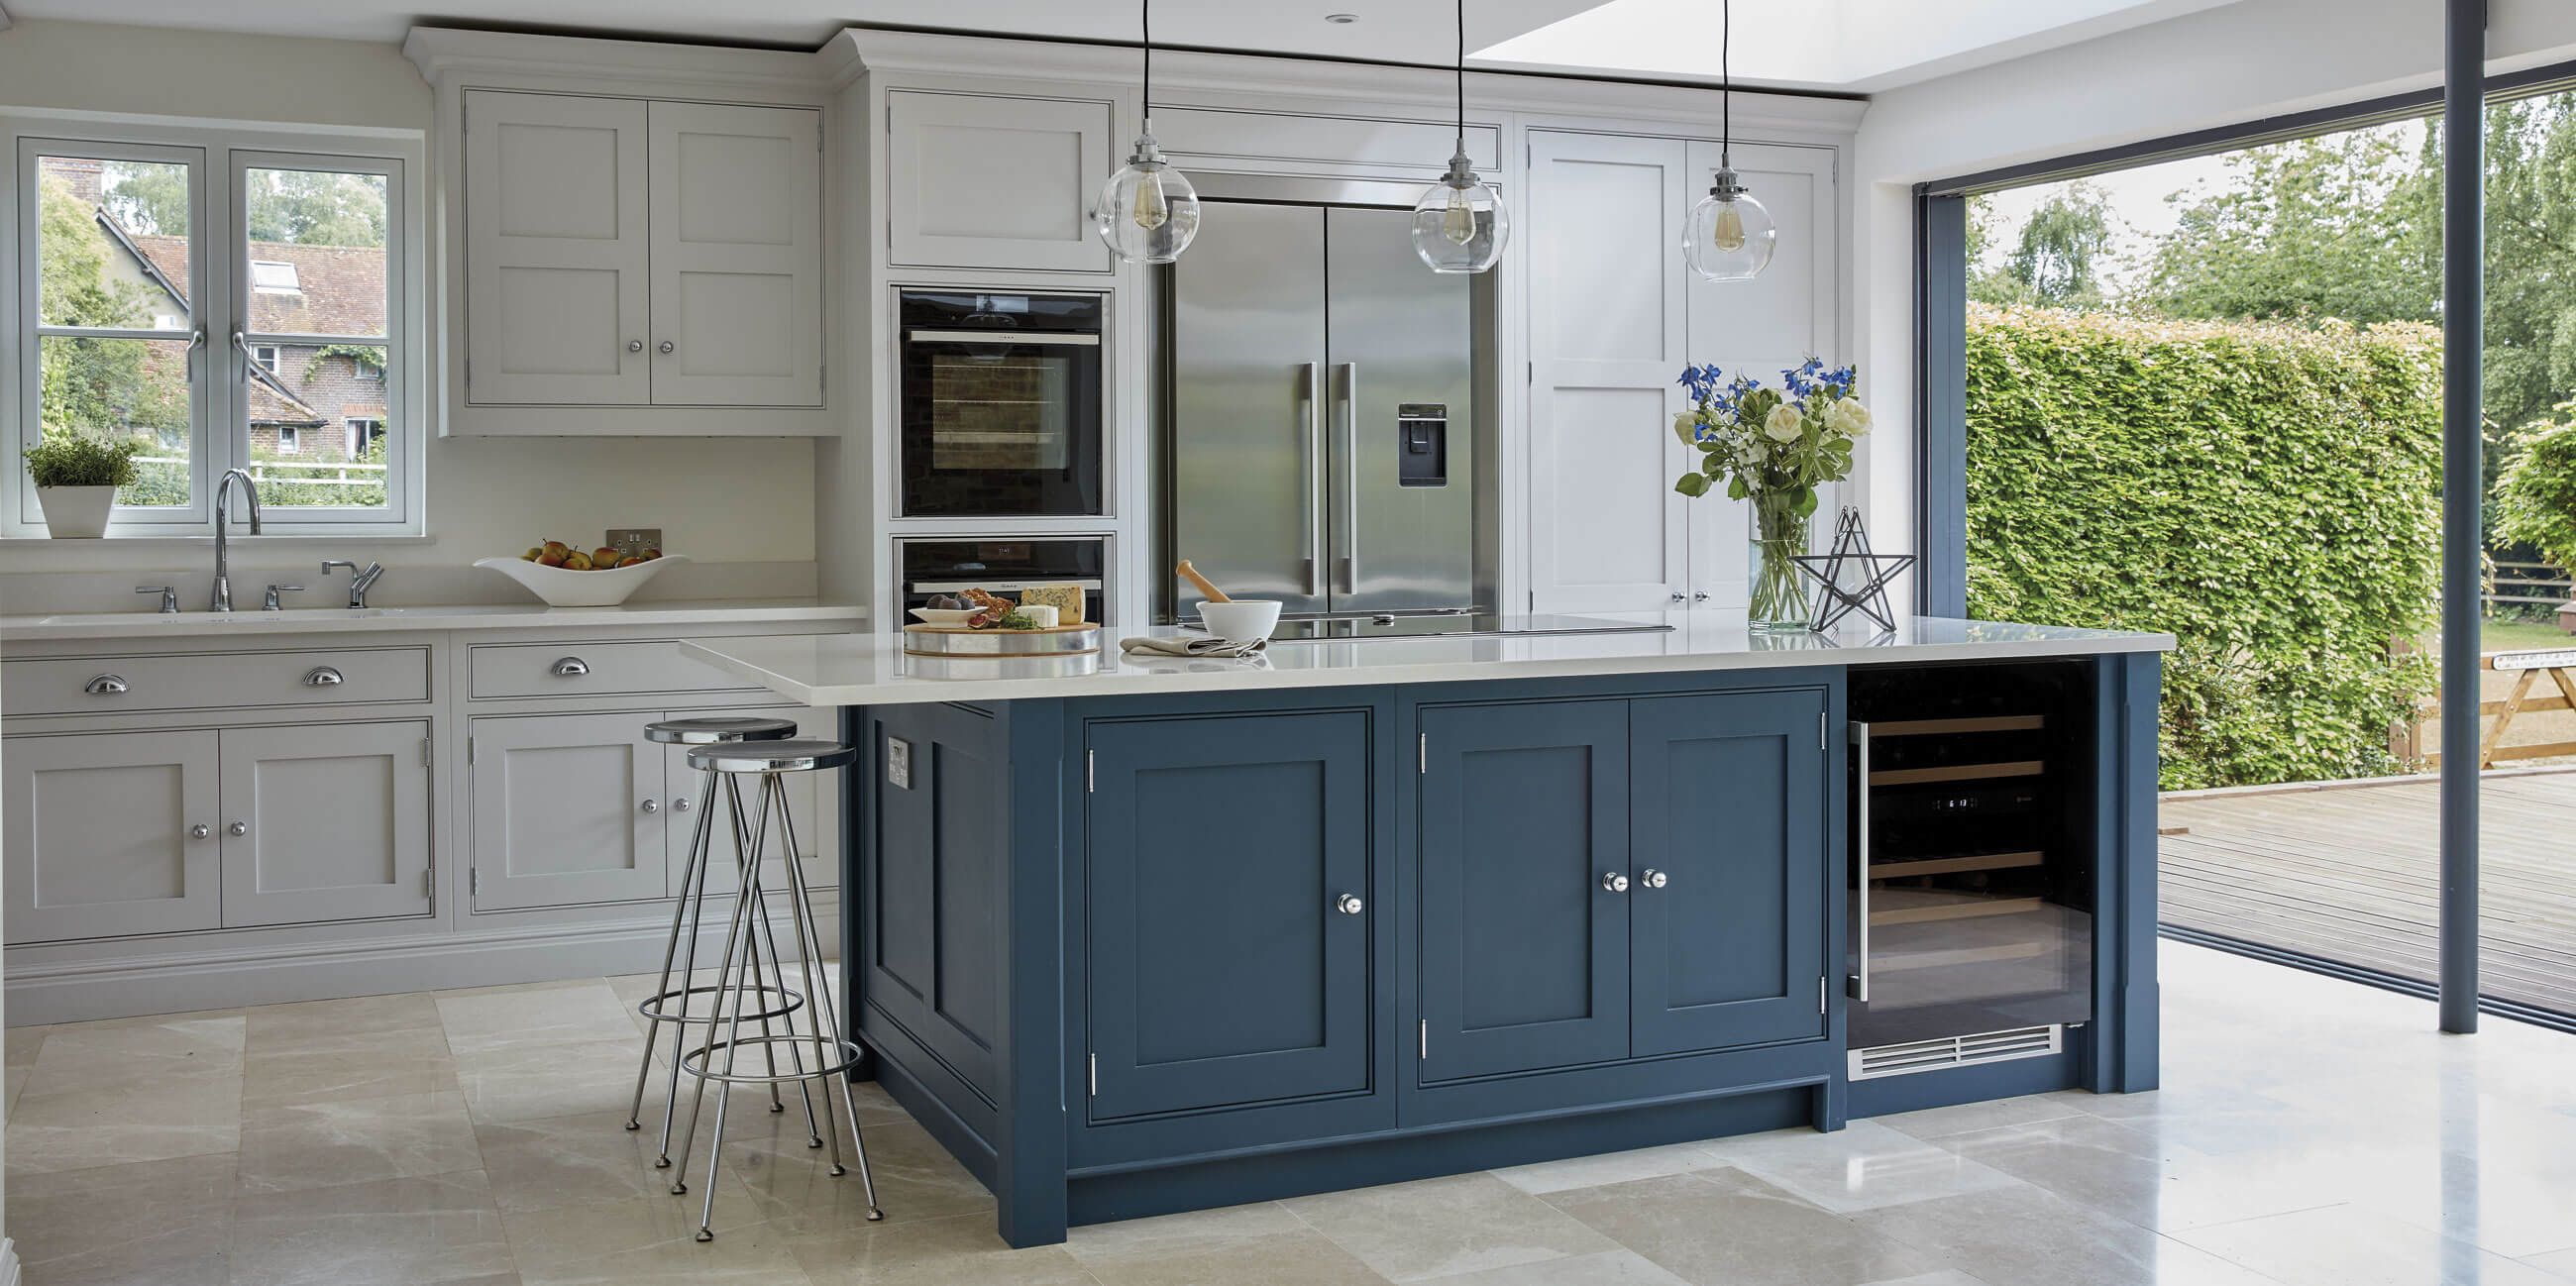 Kitchen furniture - recommended dimensions and distances